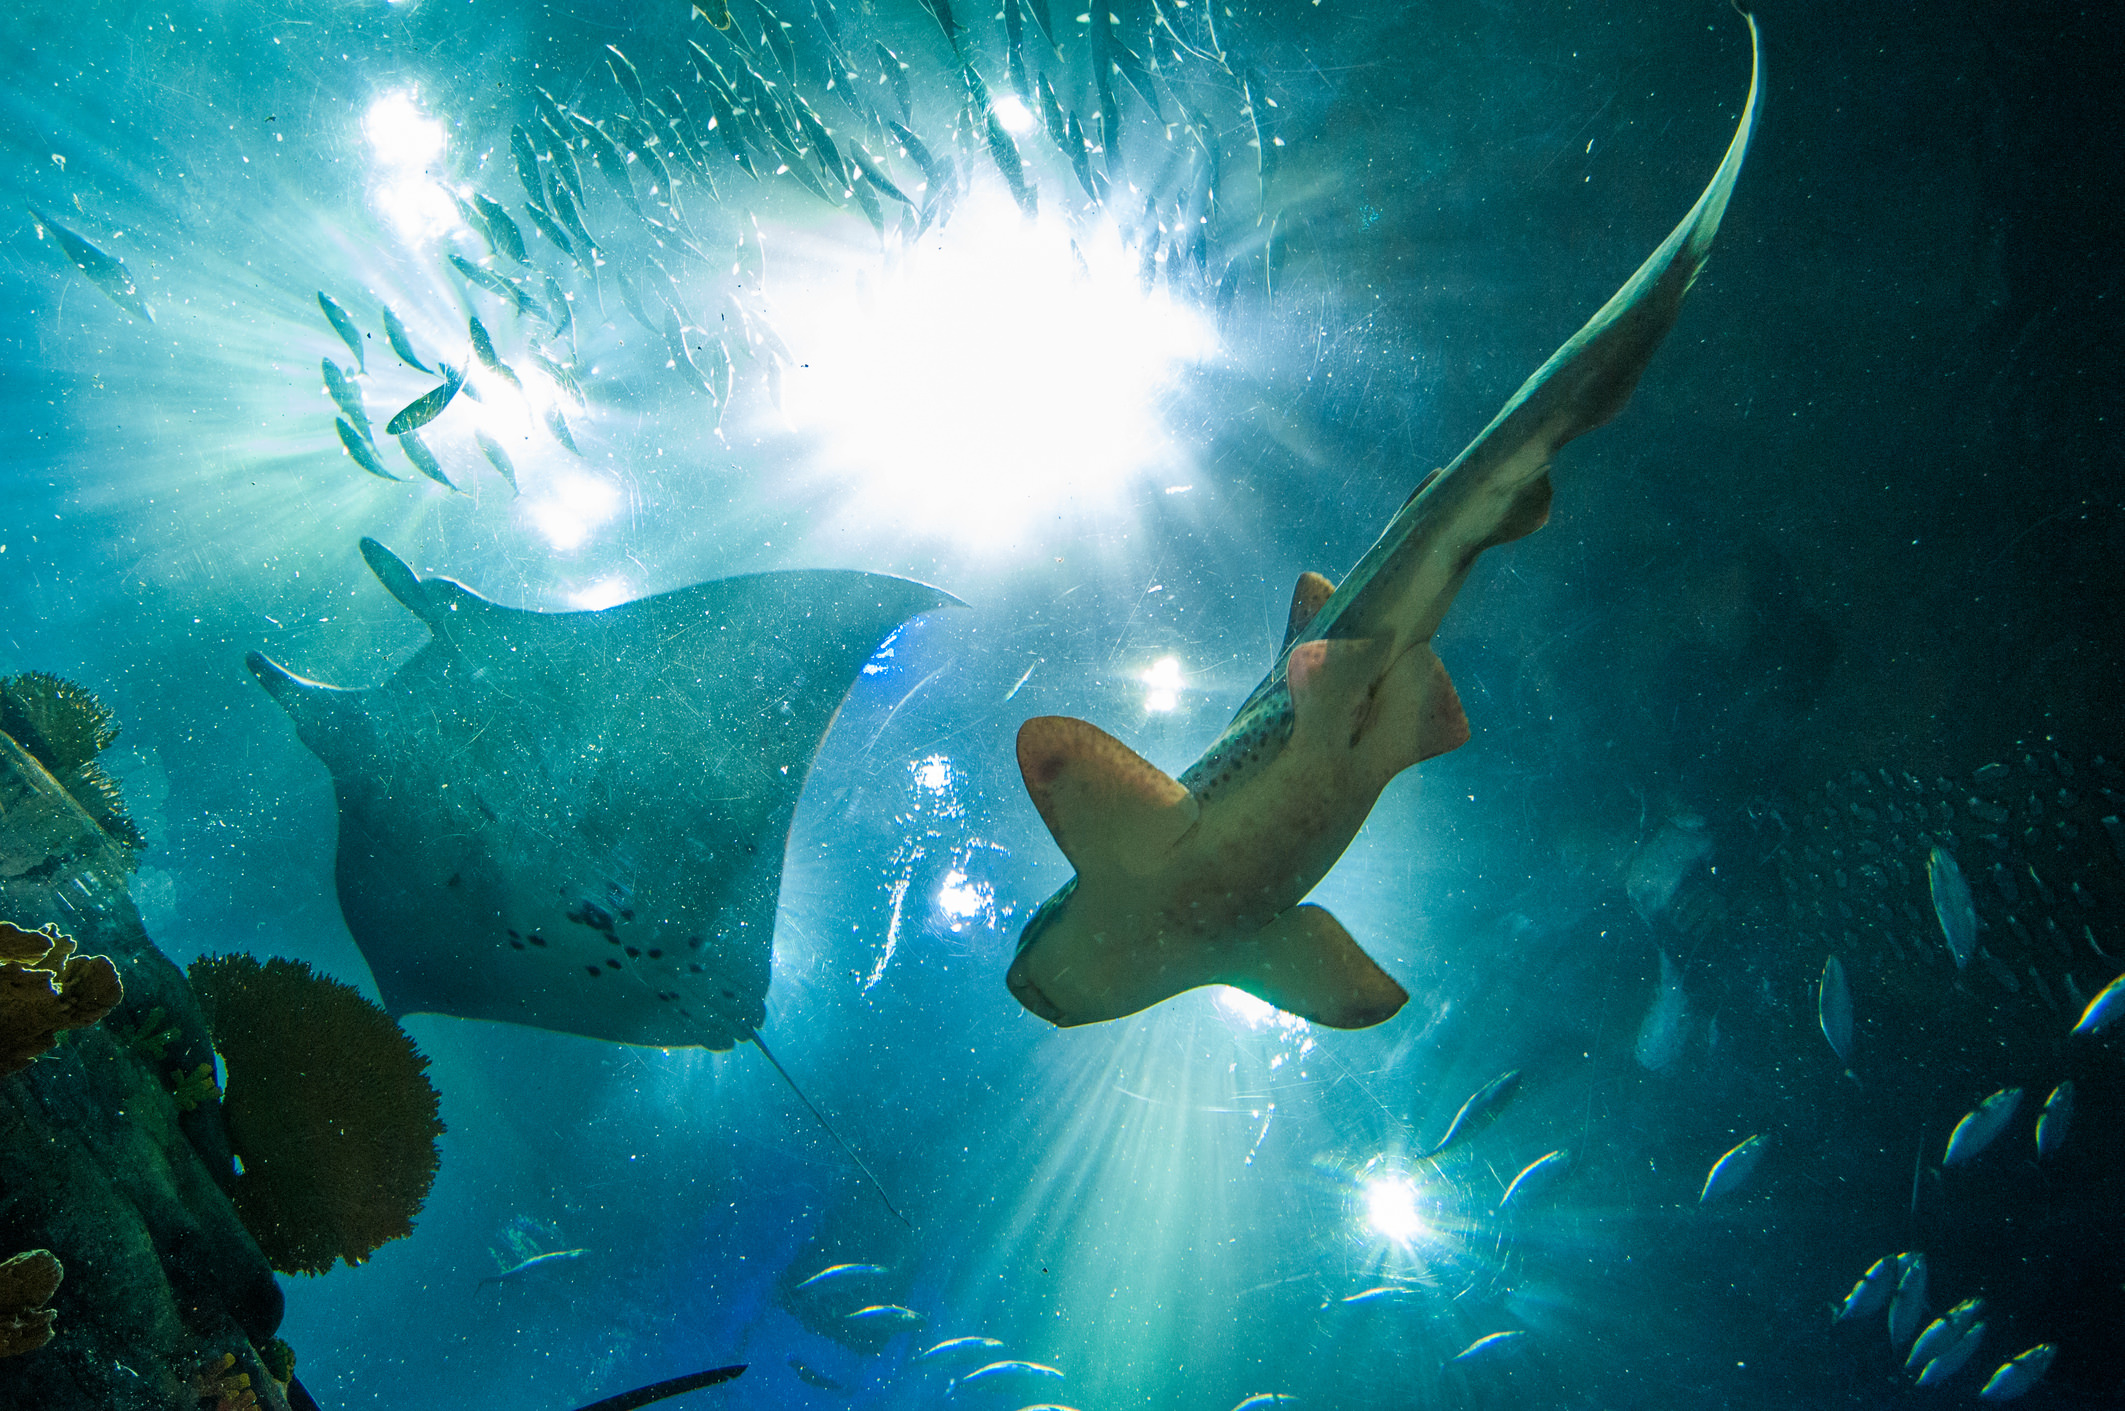 Ray and shark from below 2125x1411.jpg